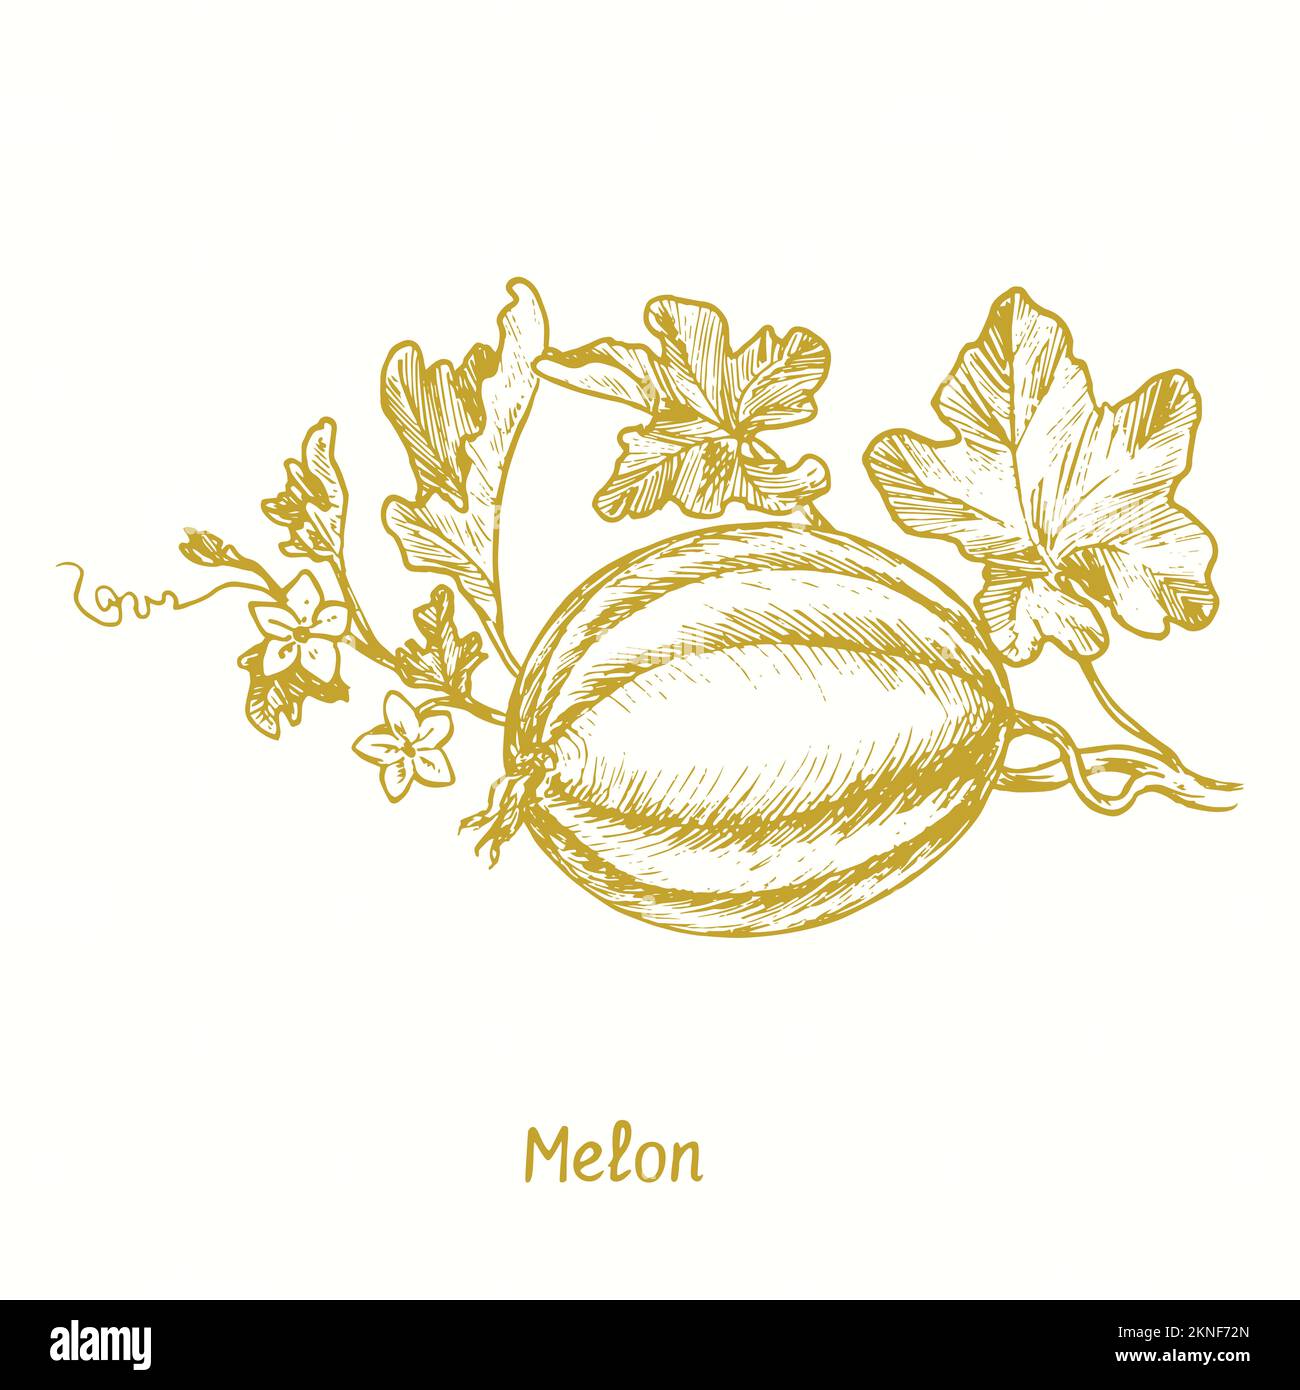 Melon ( Cucurbitaceae ) plant with leaves and ripe striped berry. Ink black and white doodle drawing in woodcut style Stock Photo